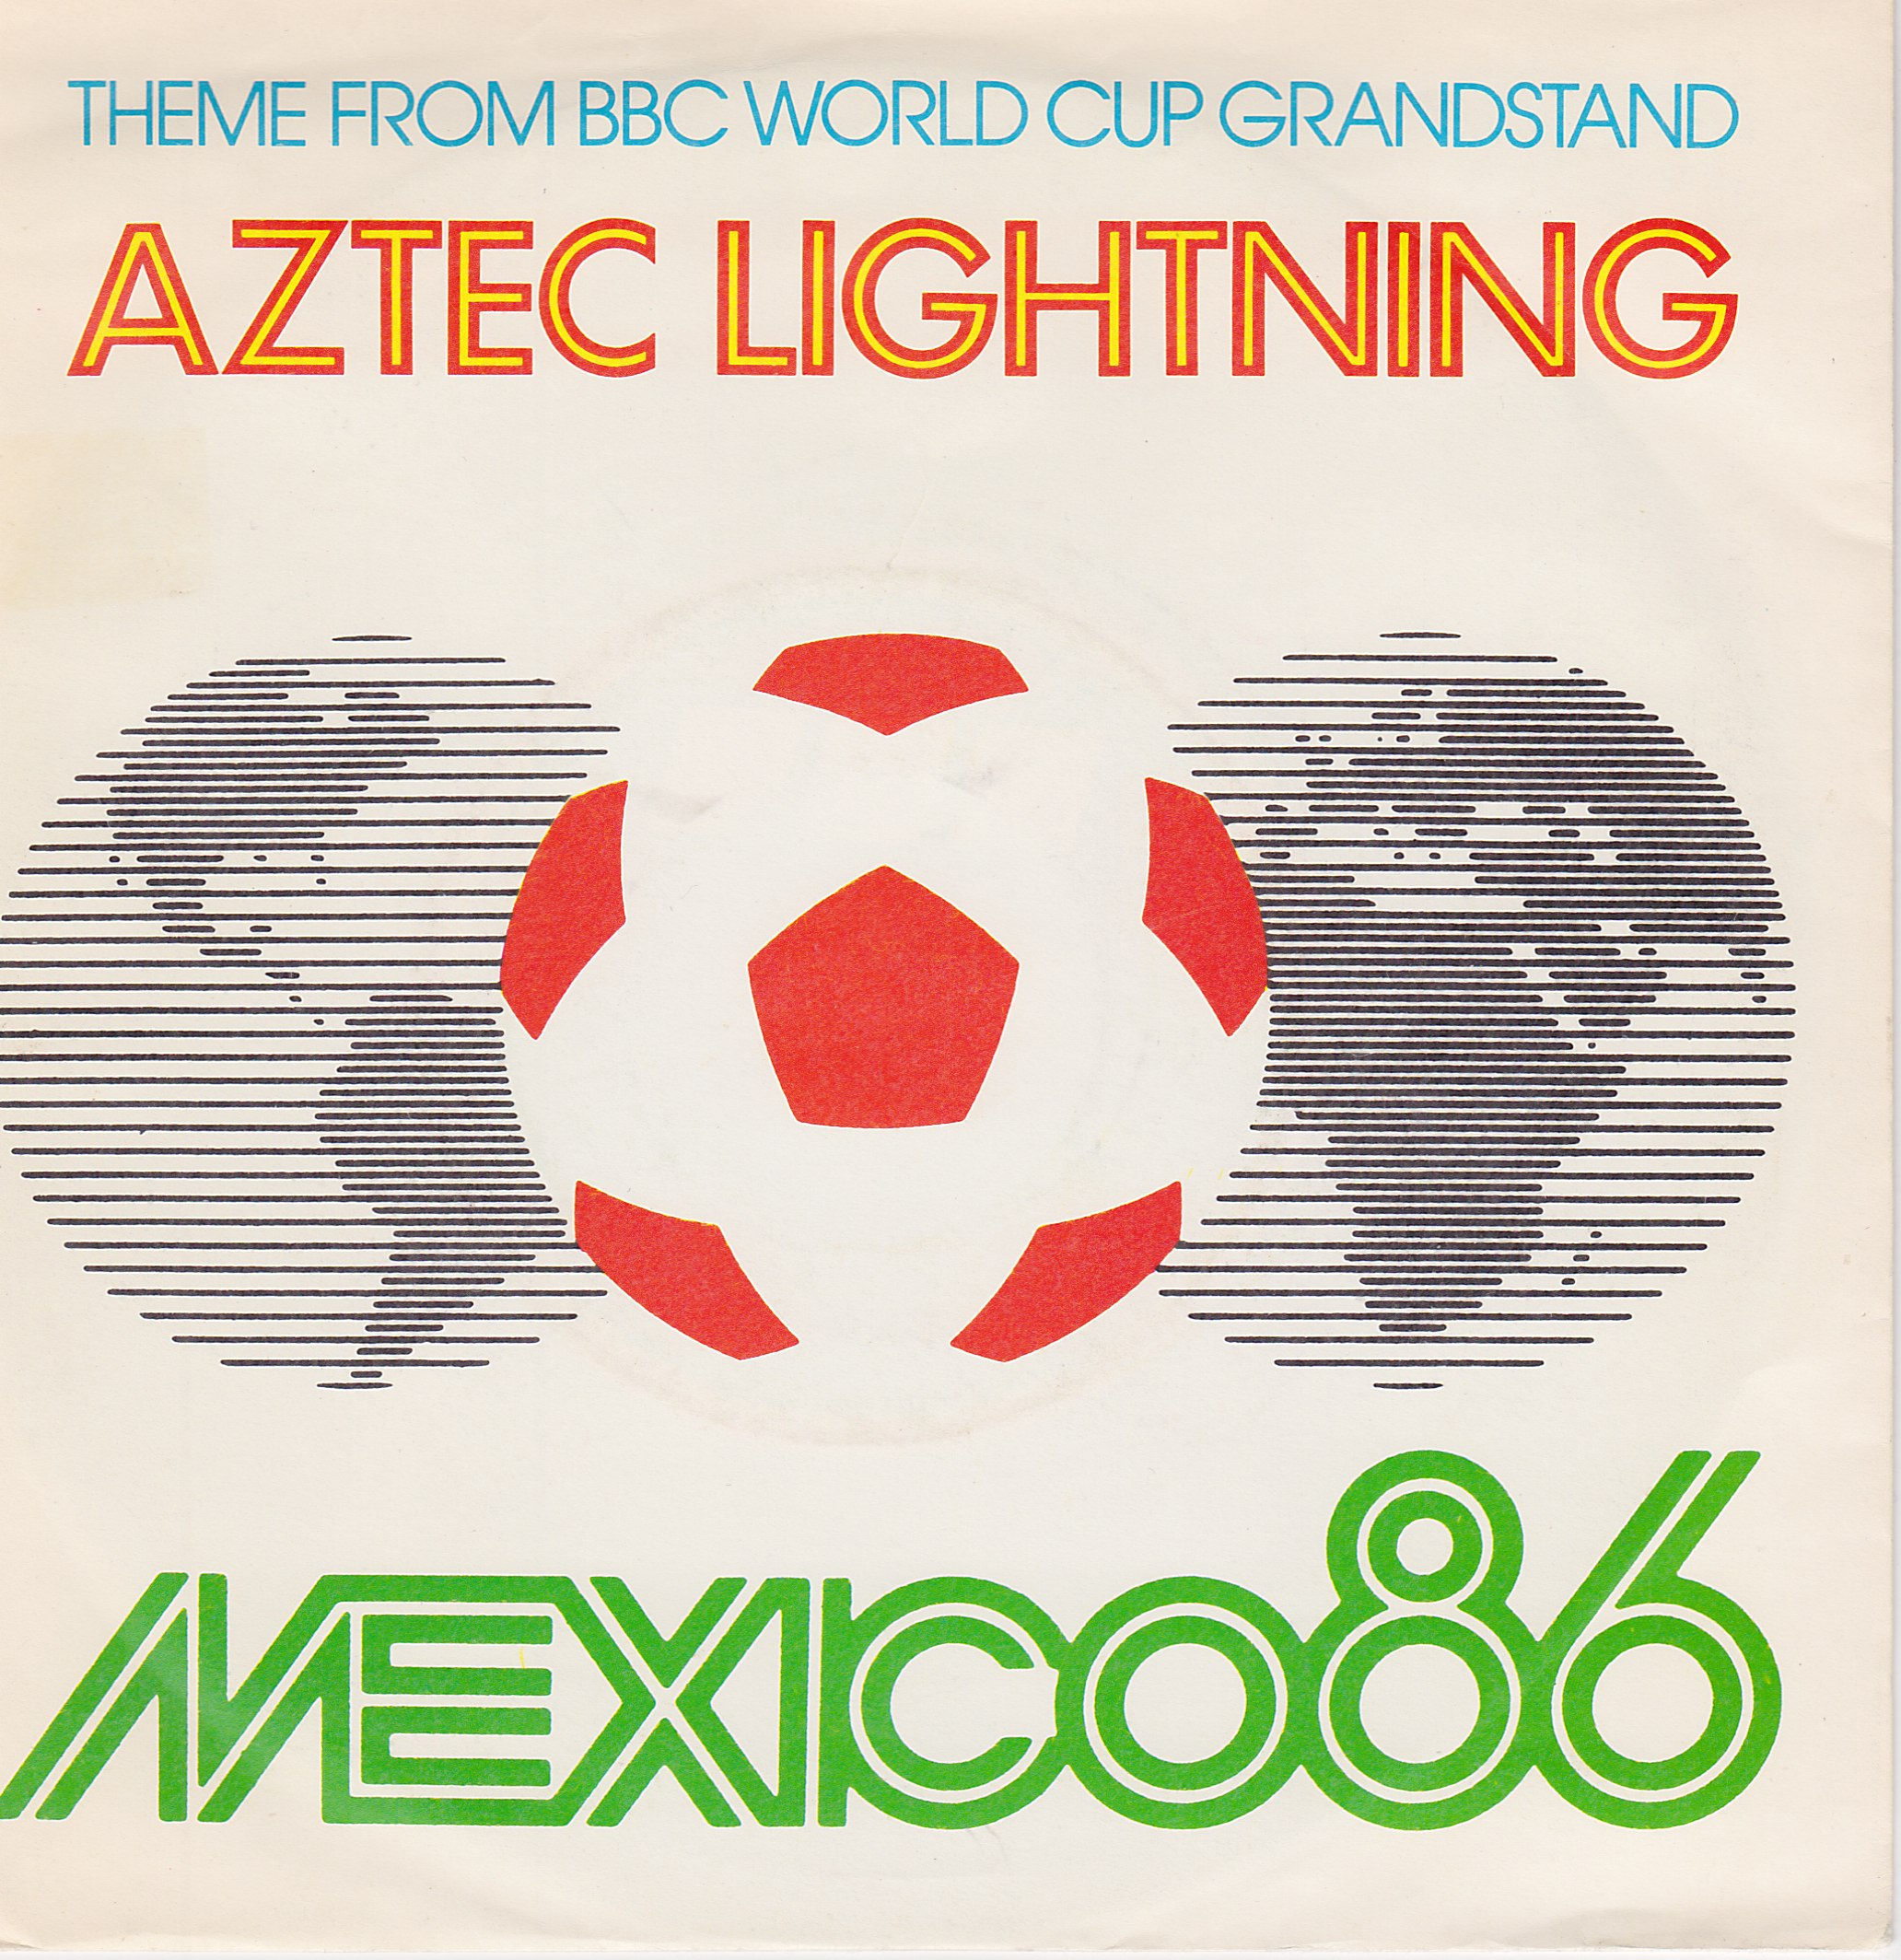 Picture of RESL 184 Aztec lightning (World cup grandstand '86) by artist Heads from the BBC singles - Records and Tapes library